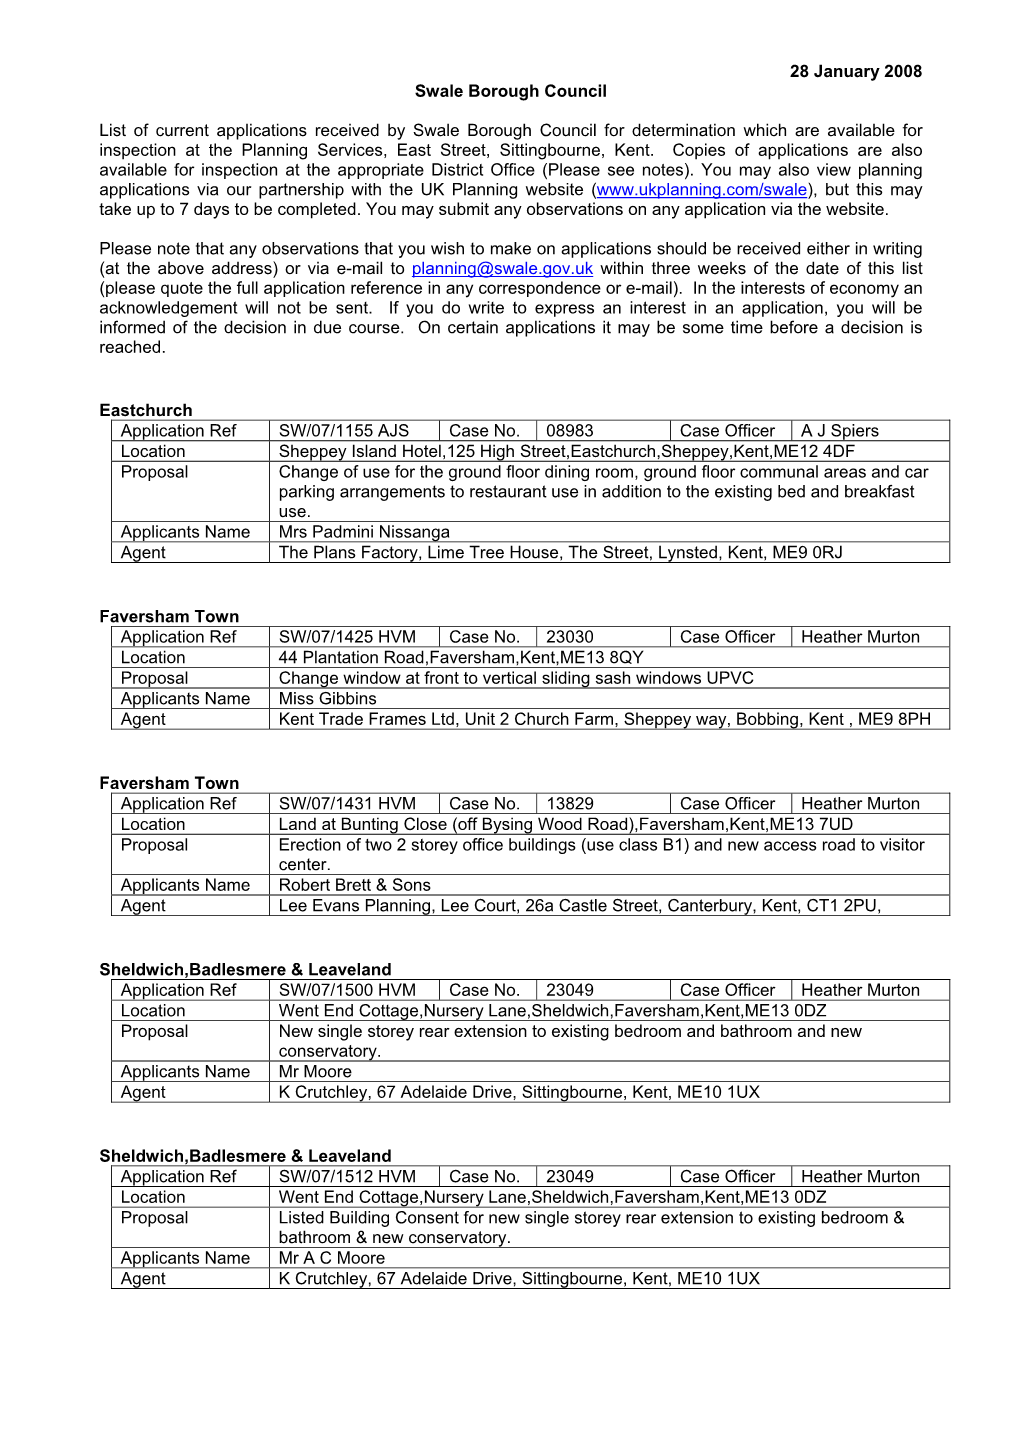 28 January 2008 Swale Borough Council List of Current Applications